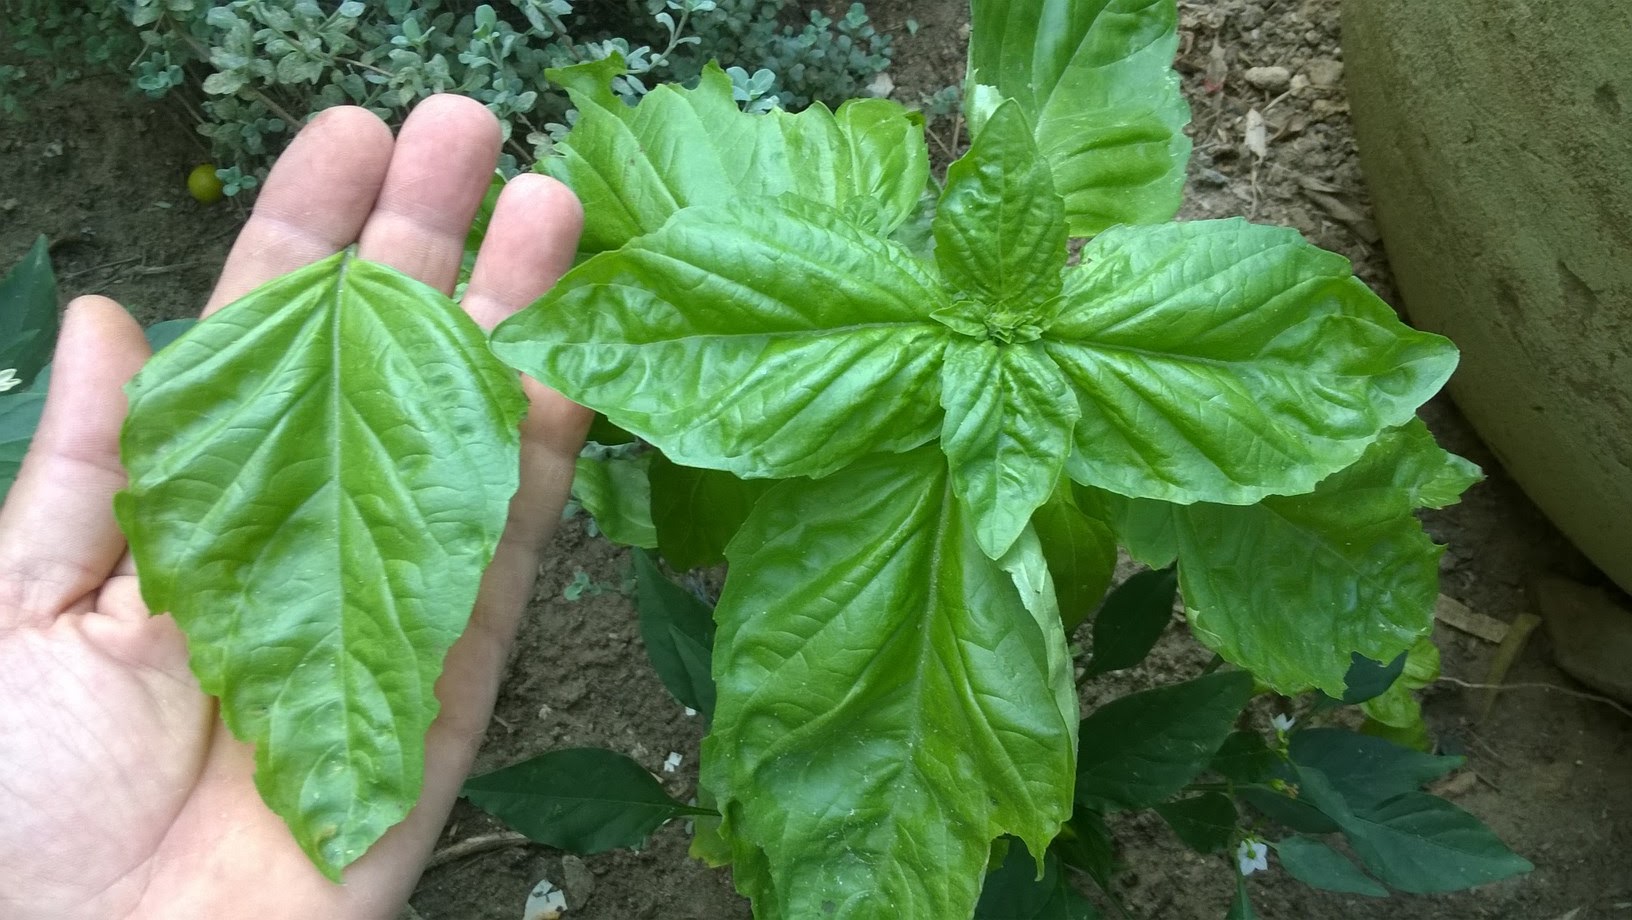 Basil leaves are renowned for their medicinal properties as well as for their culinary properties. It’s so awesome to be able to walk out the back door and harvest garden fresh basil leaves for cooking.